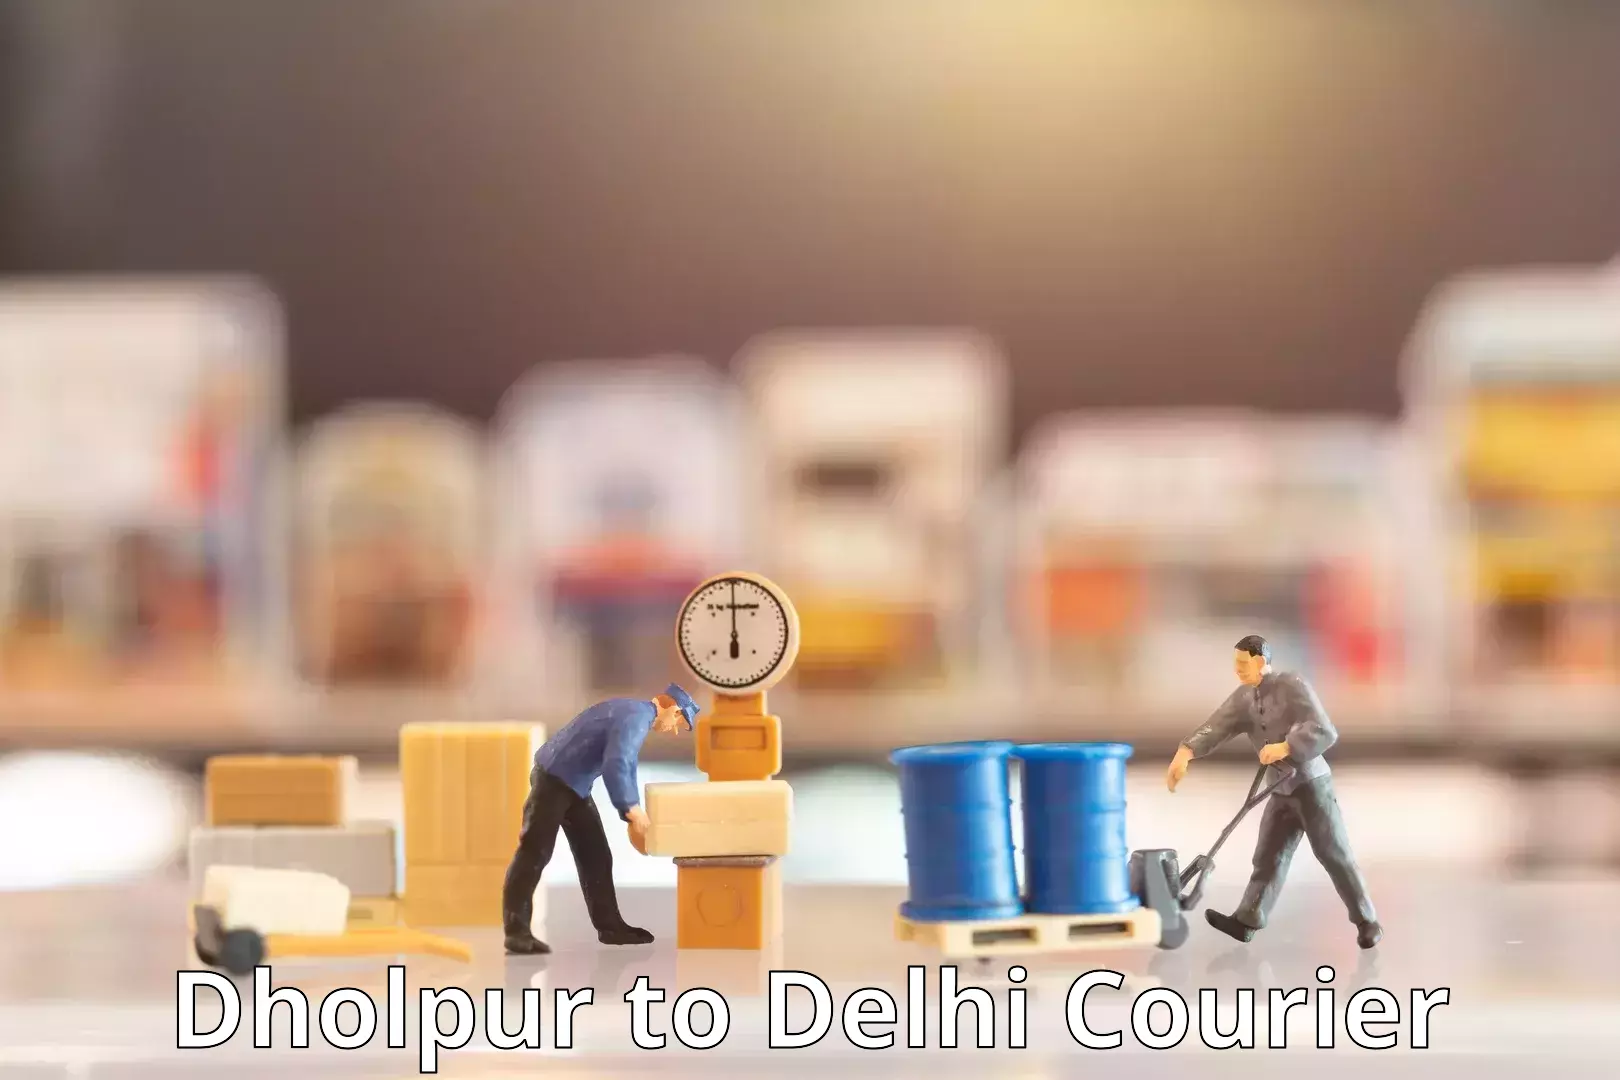 Courier app Dholpur to NCR